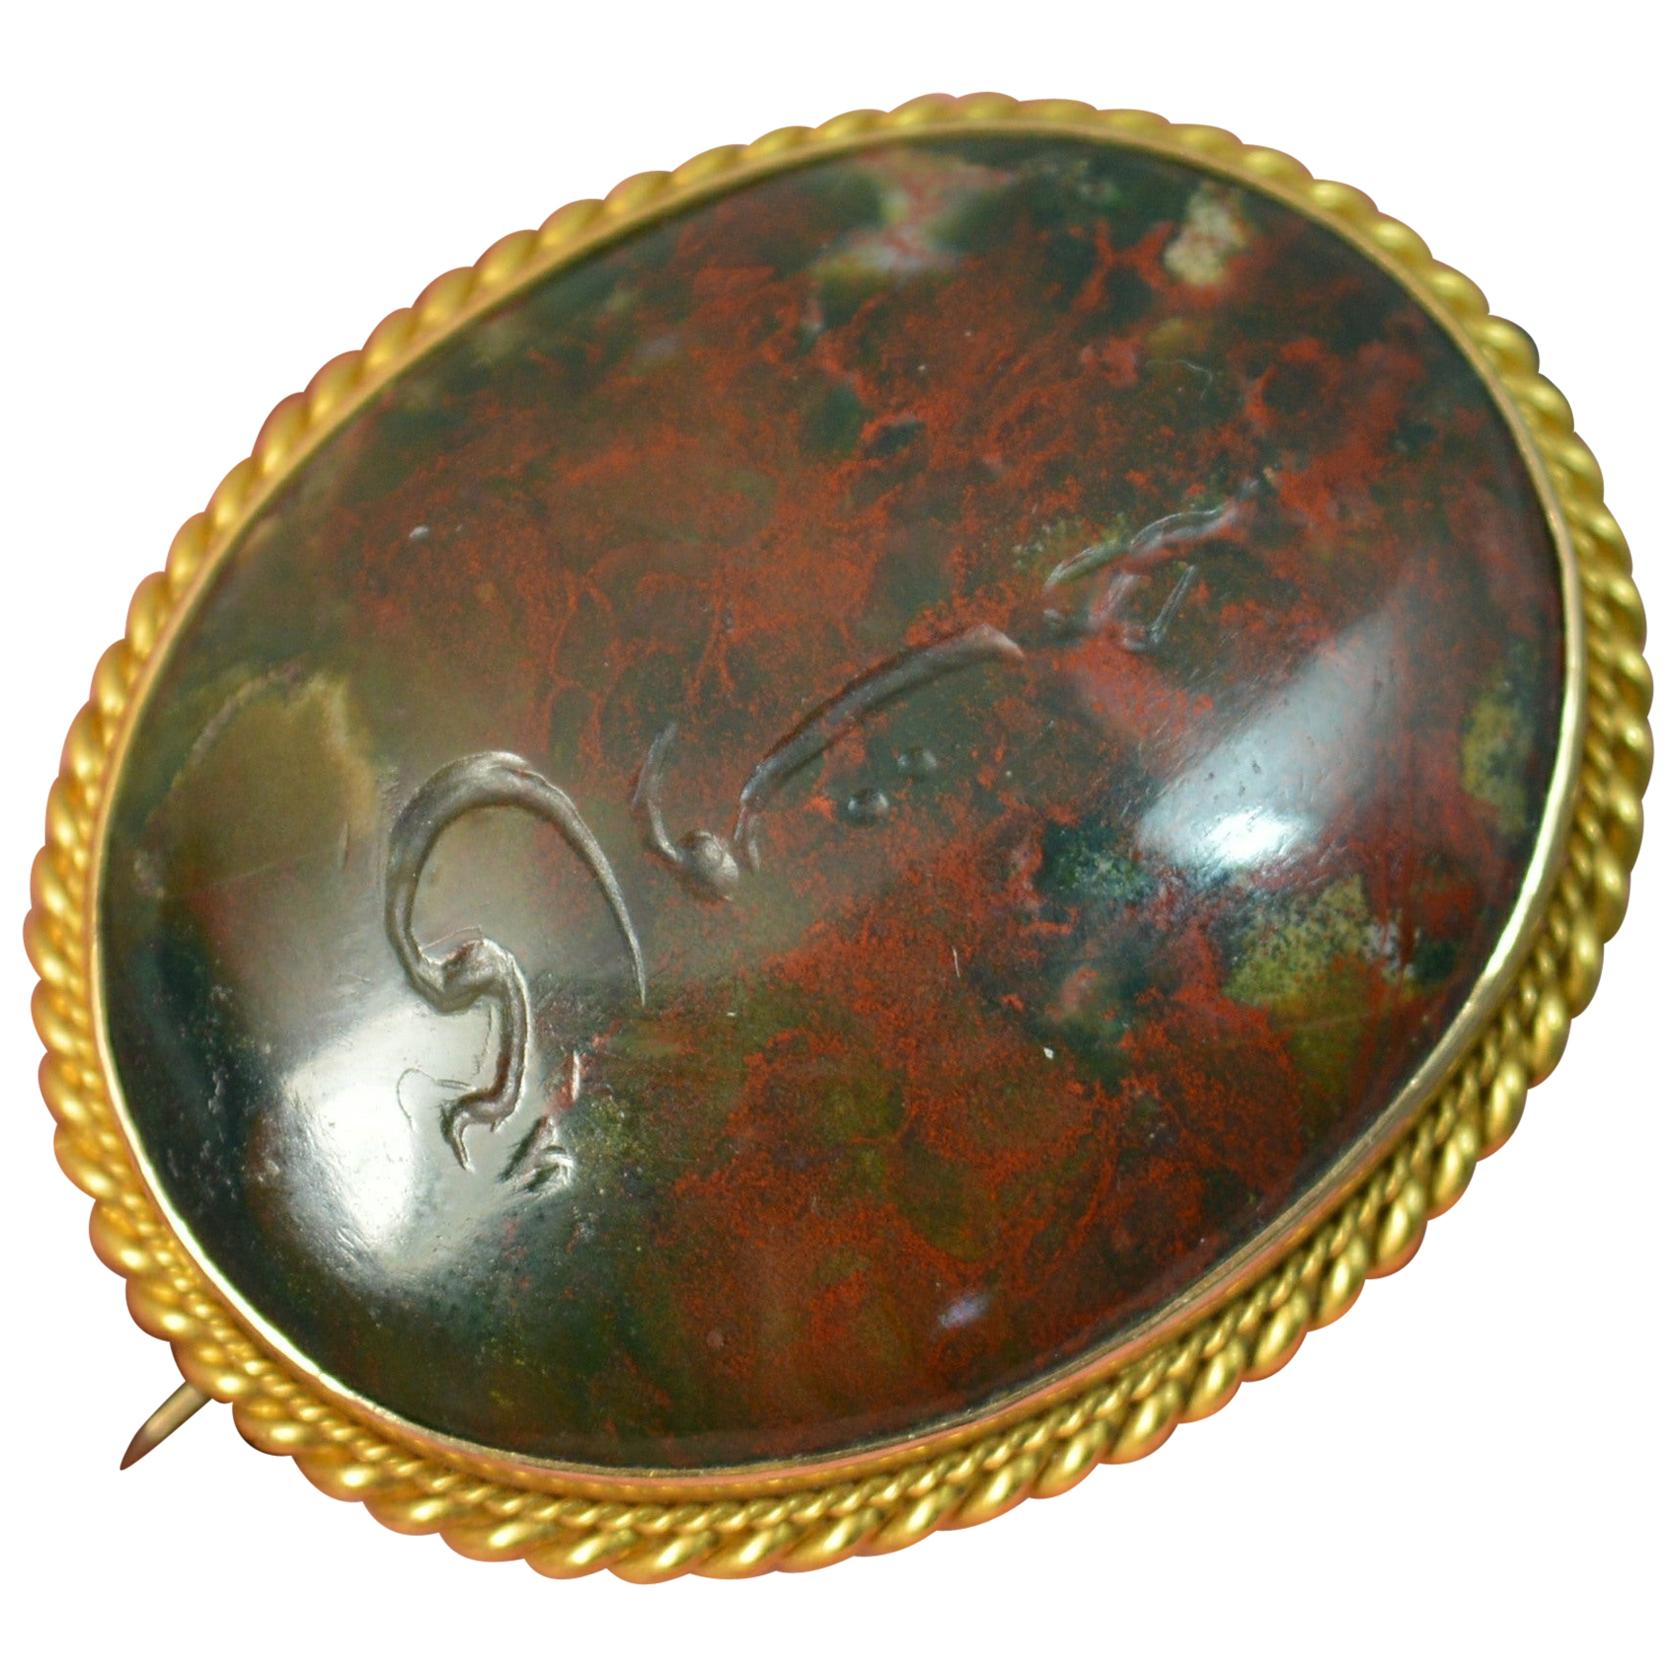 Antique 18 Carat Gold and Bloodstone Intaglio Brooch